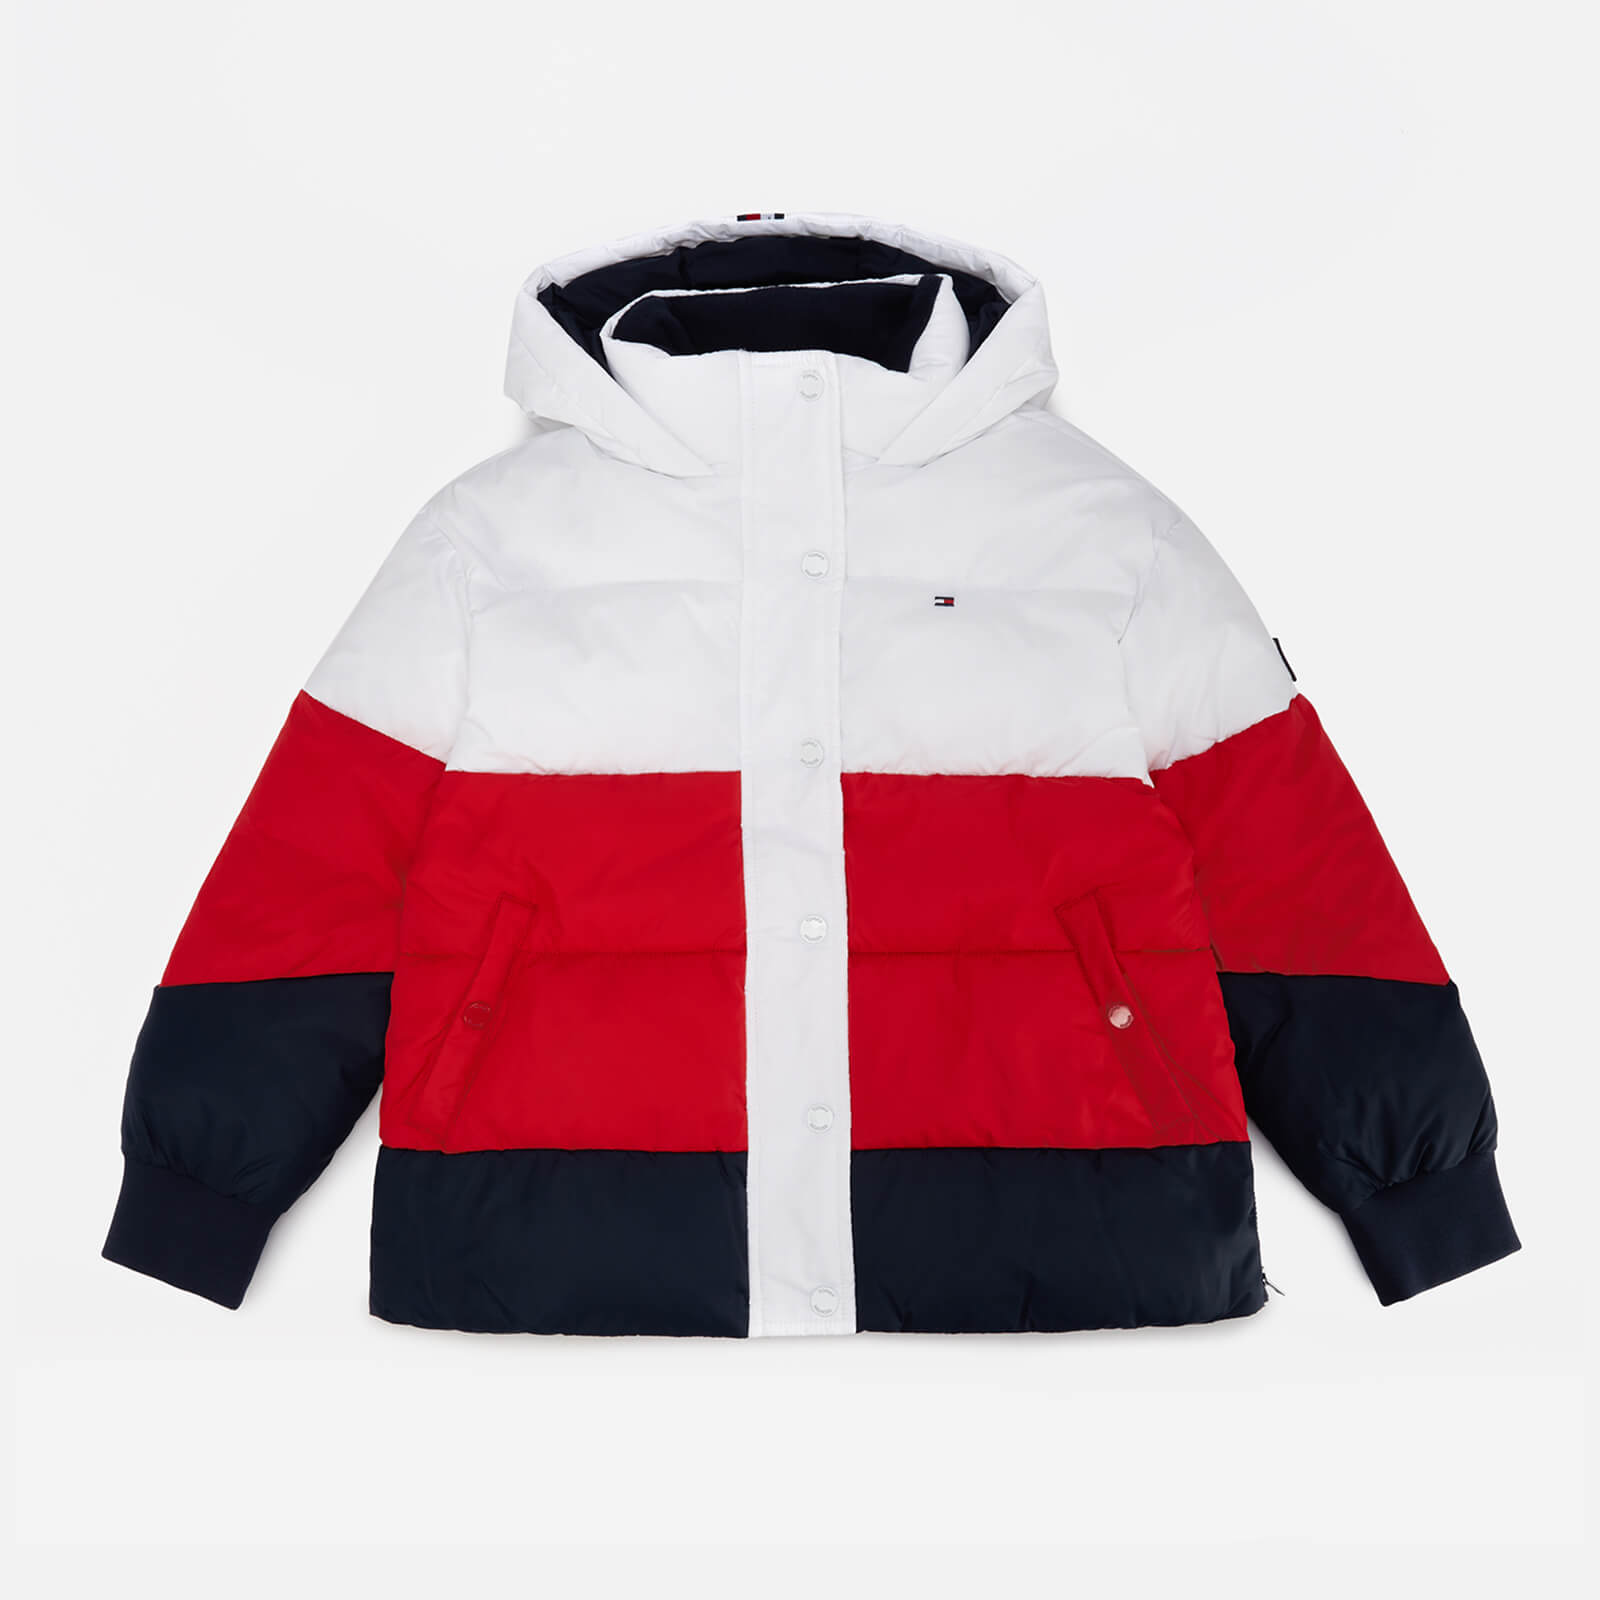 Tommy Hilfiger Girls' Essential Puffer Jacket - White/Red/Blue - 8 Years